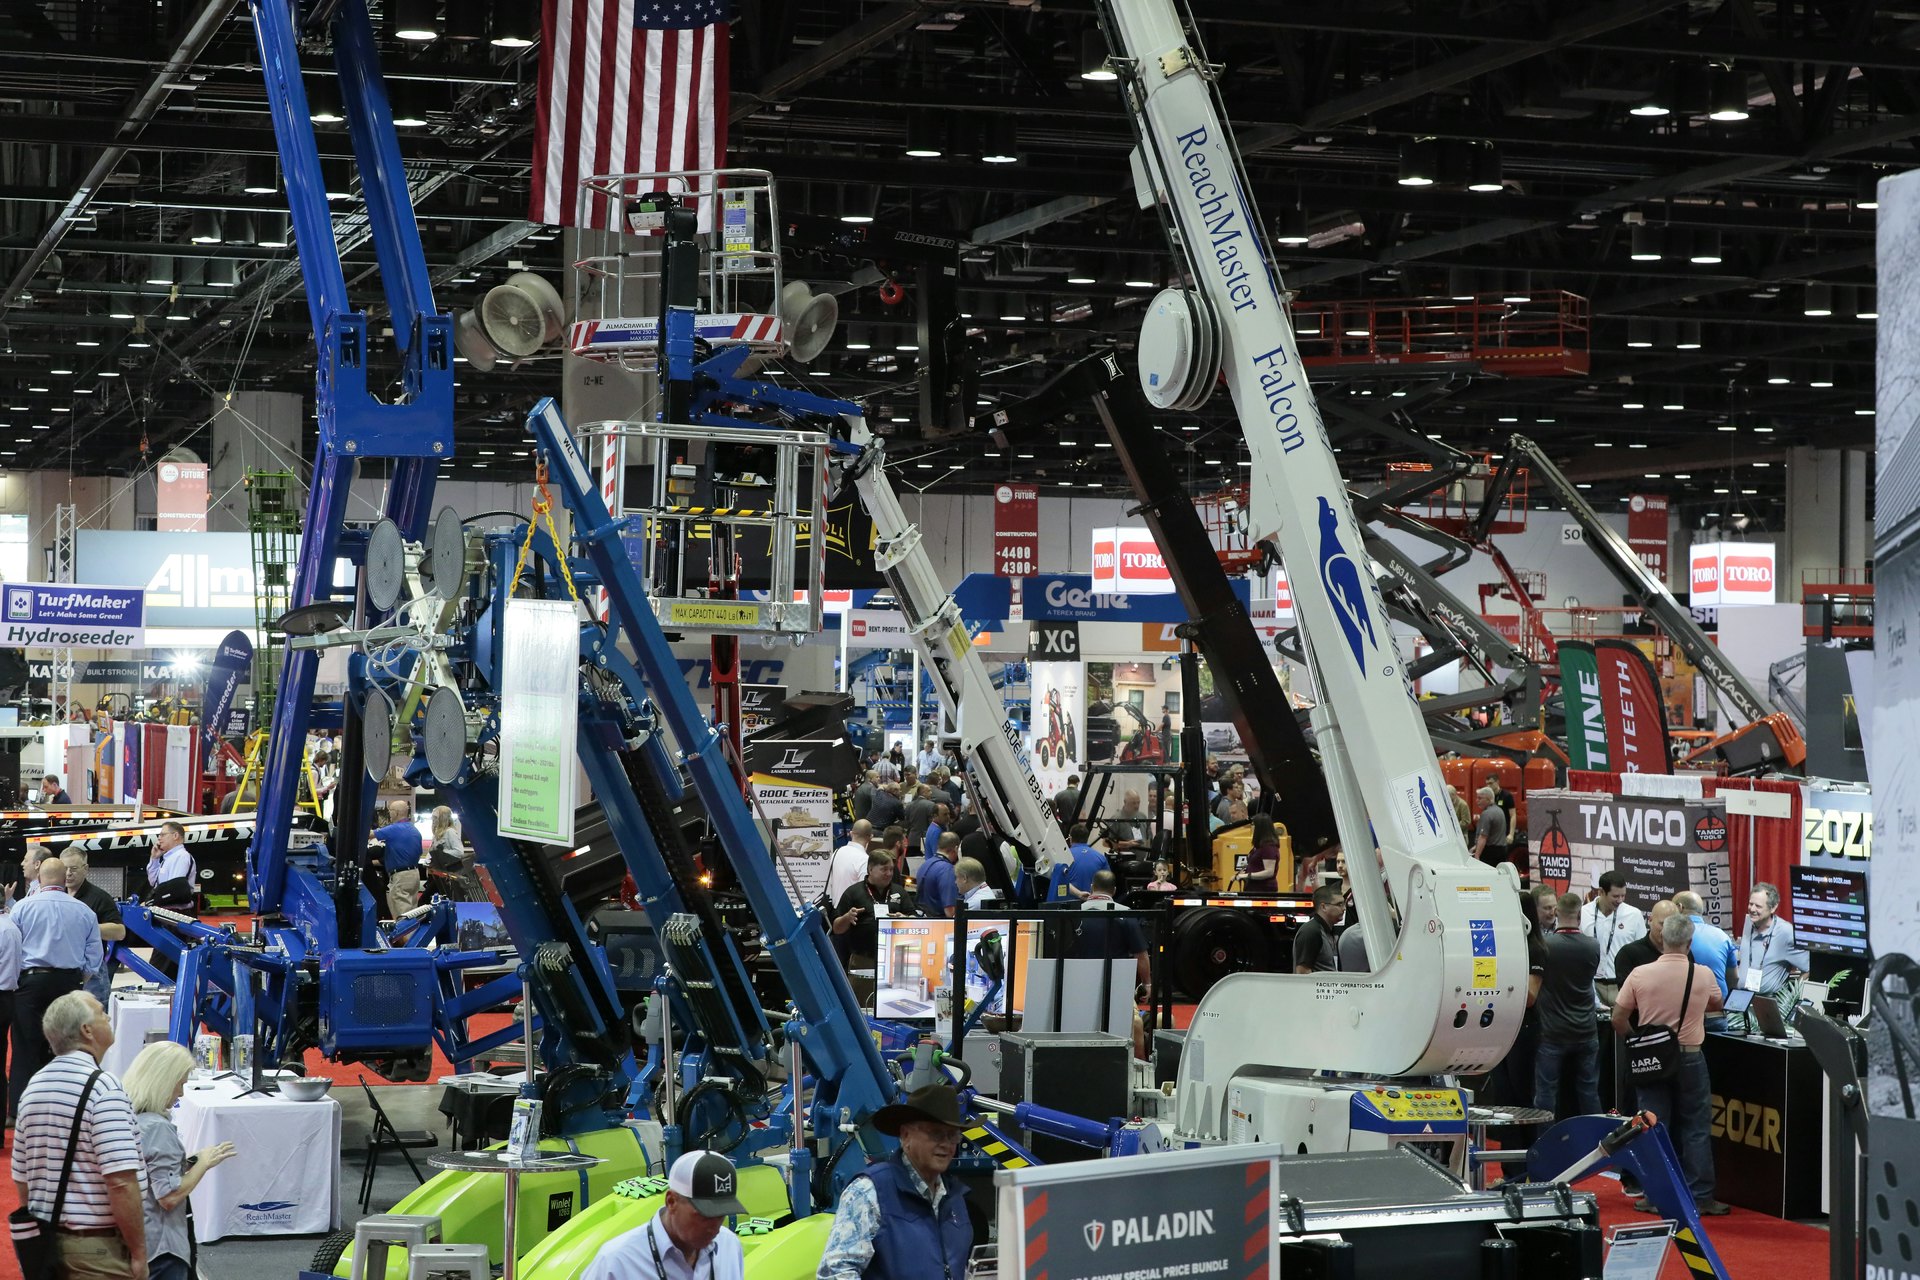 Lift equipment, power equipment, construction equipment, general tools and everything in between—the ARA Show has it all.